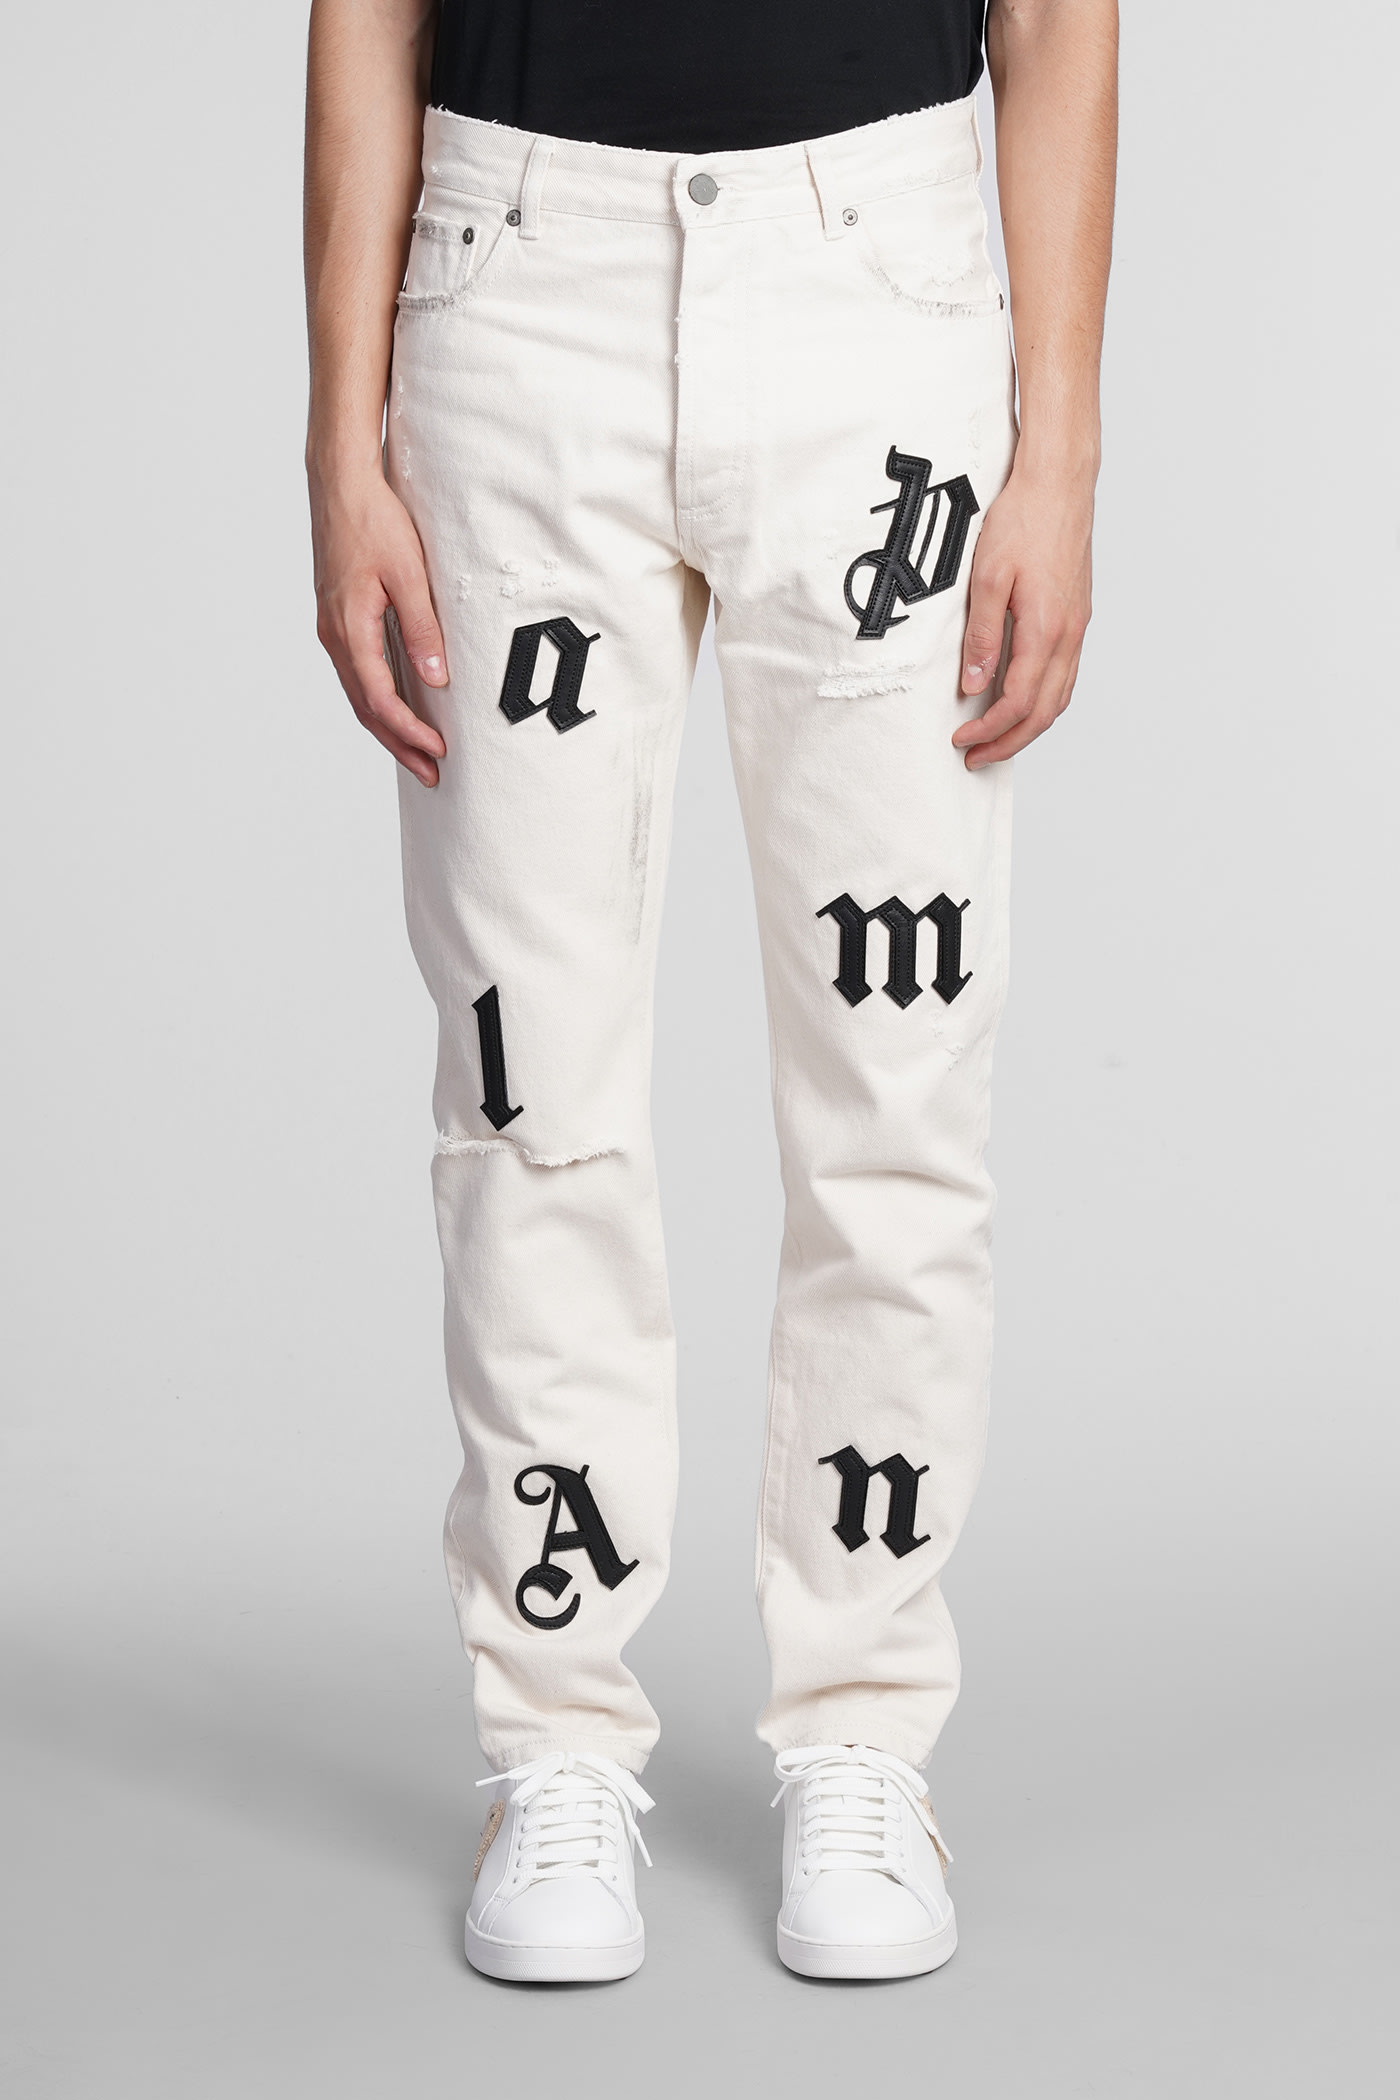 Palm Angels Jeans In White Denim